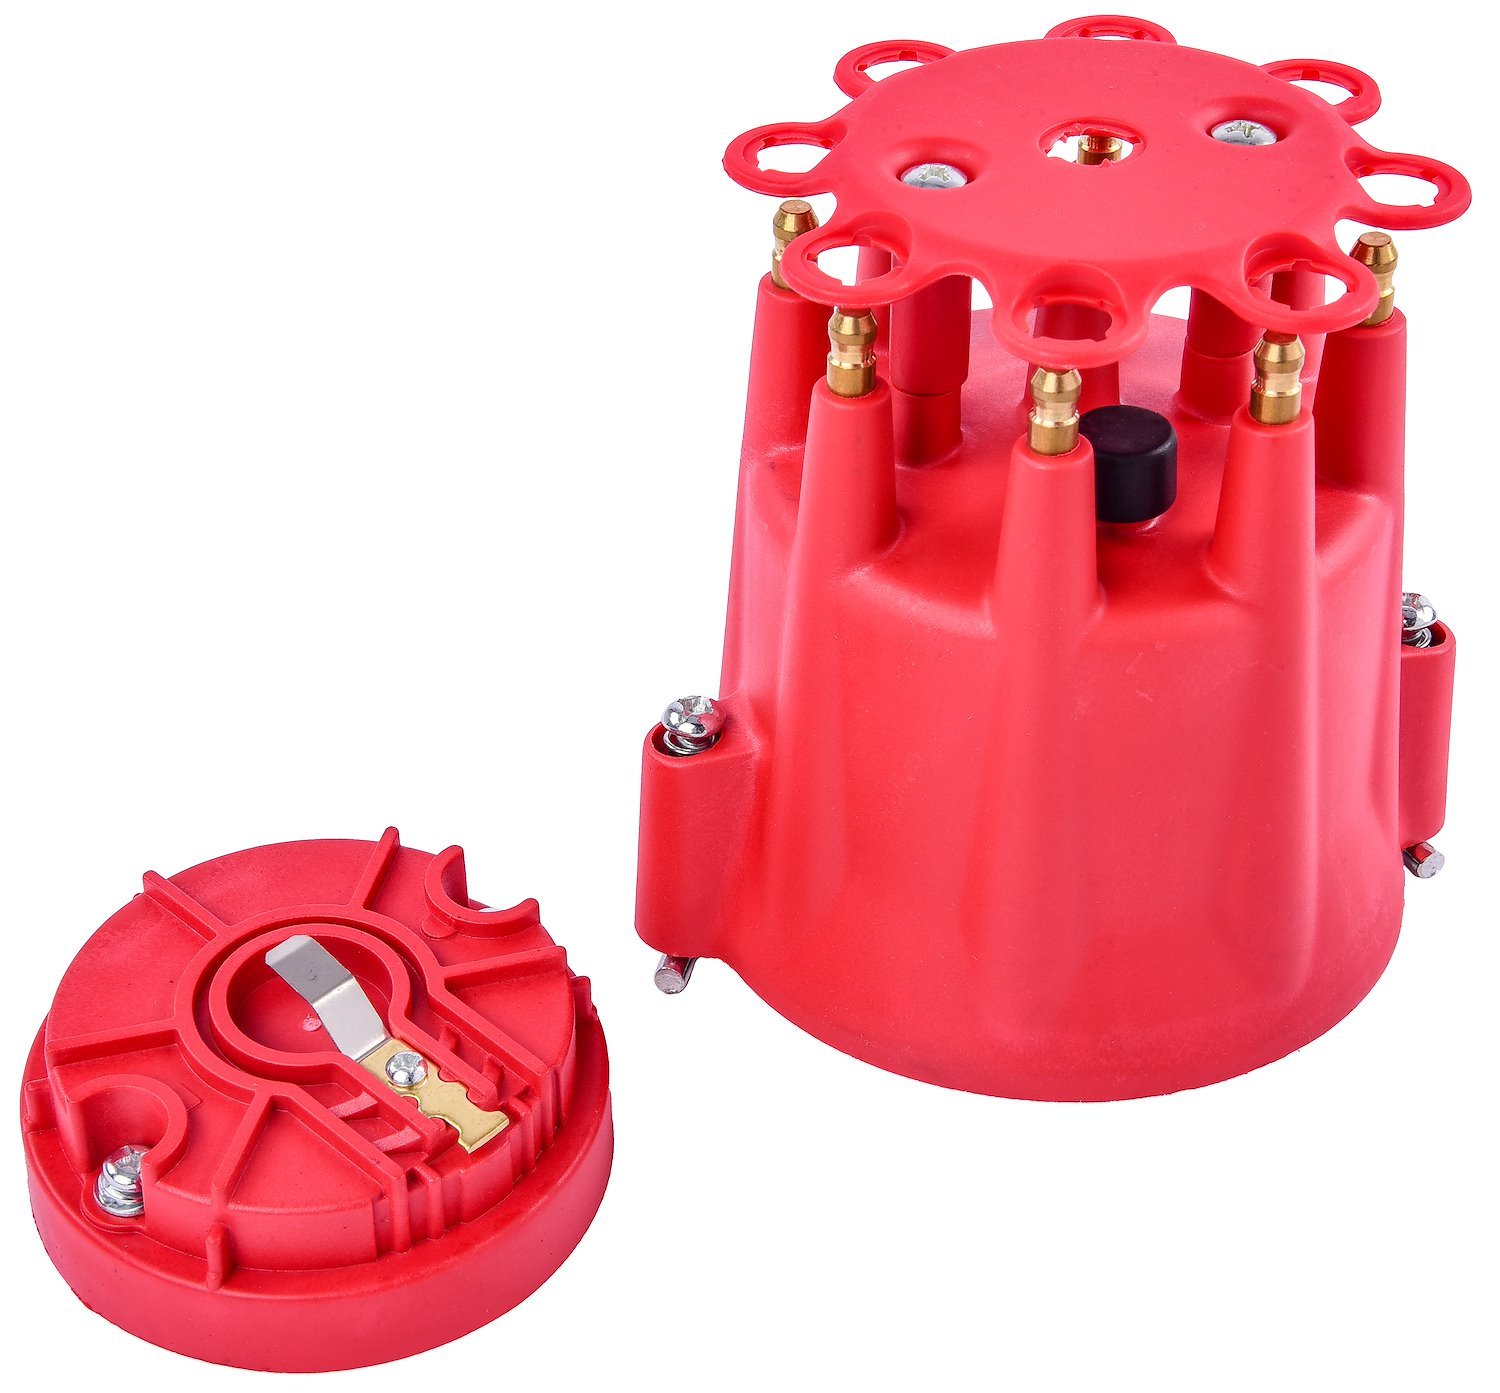 Replacement Distributor Cap & Rotor for JEGS SSR-III RTR Distributors [Red]